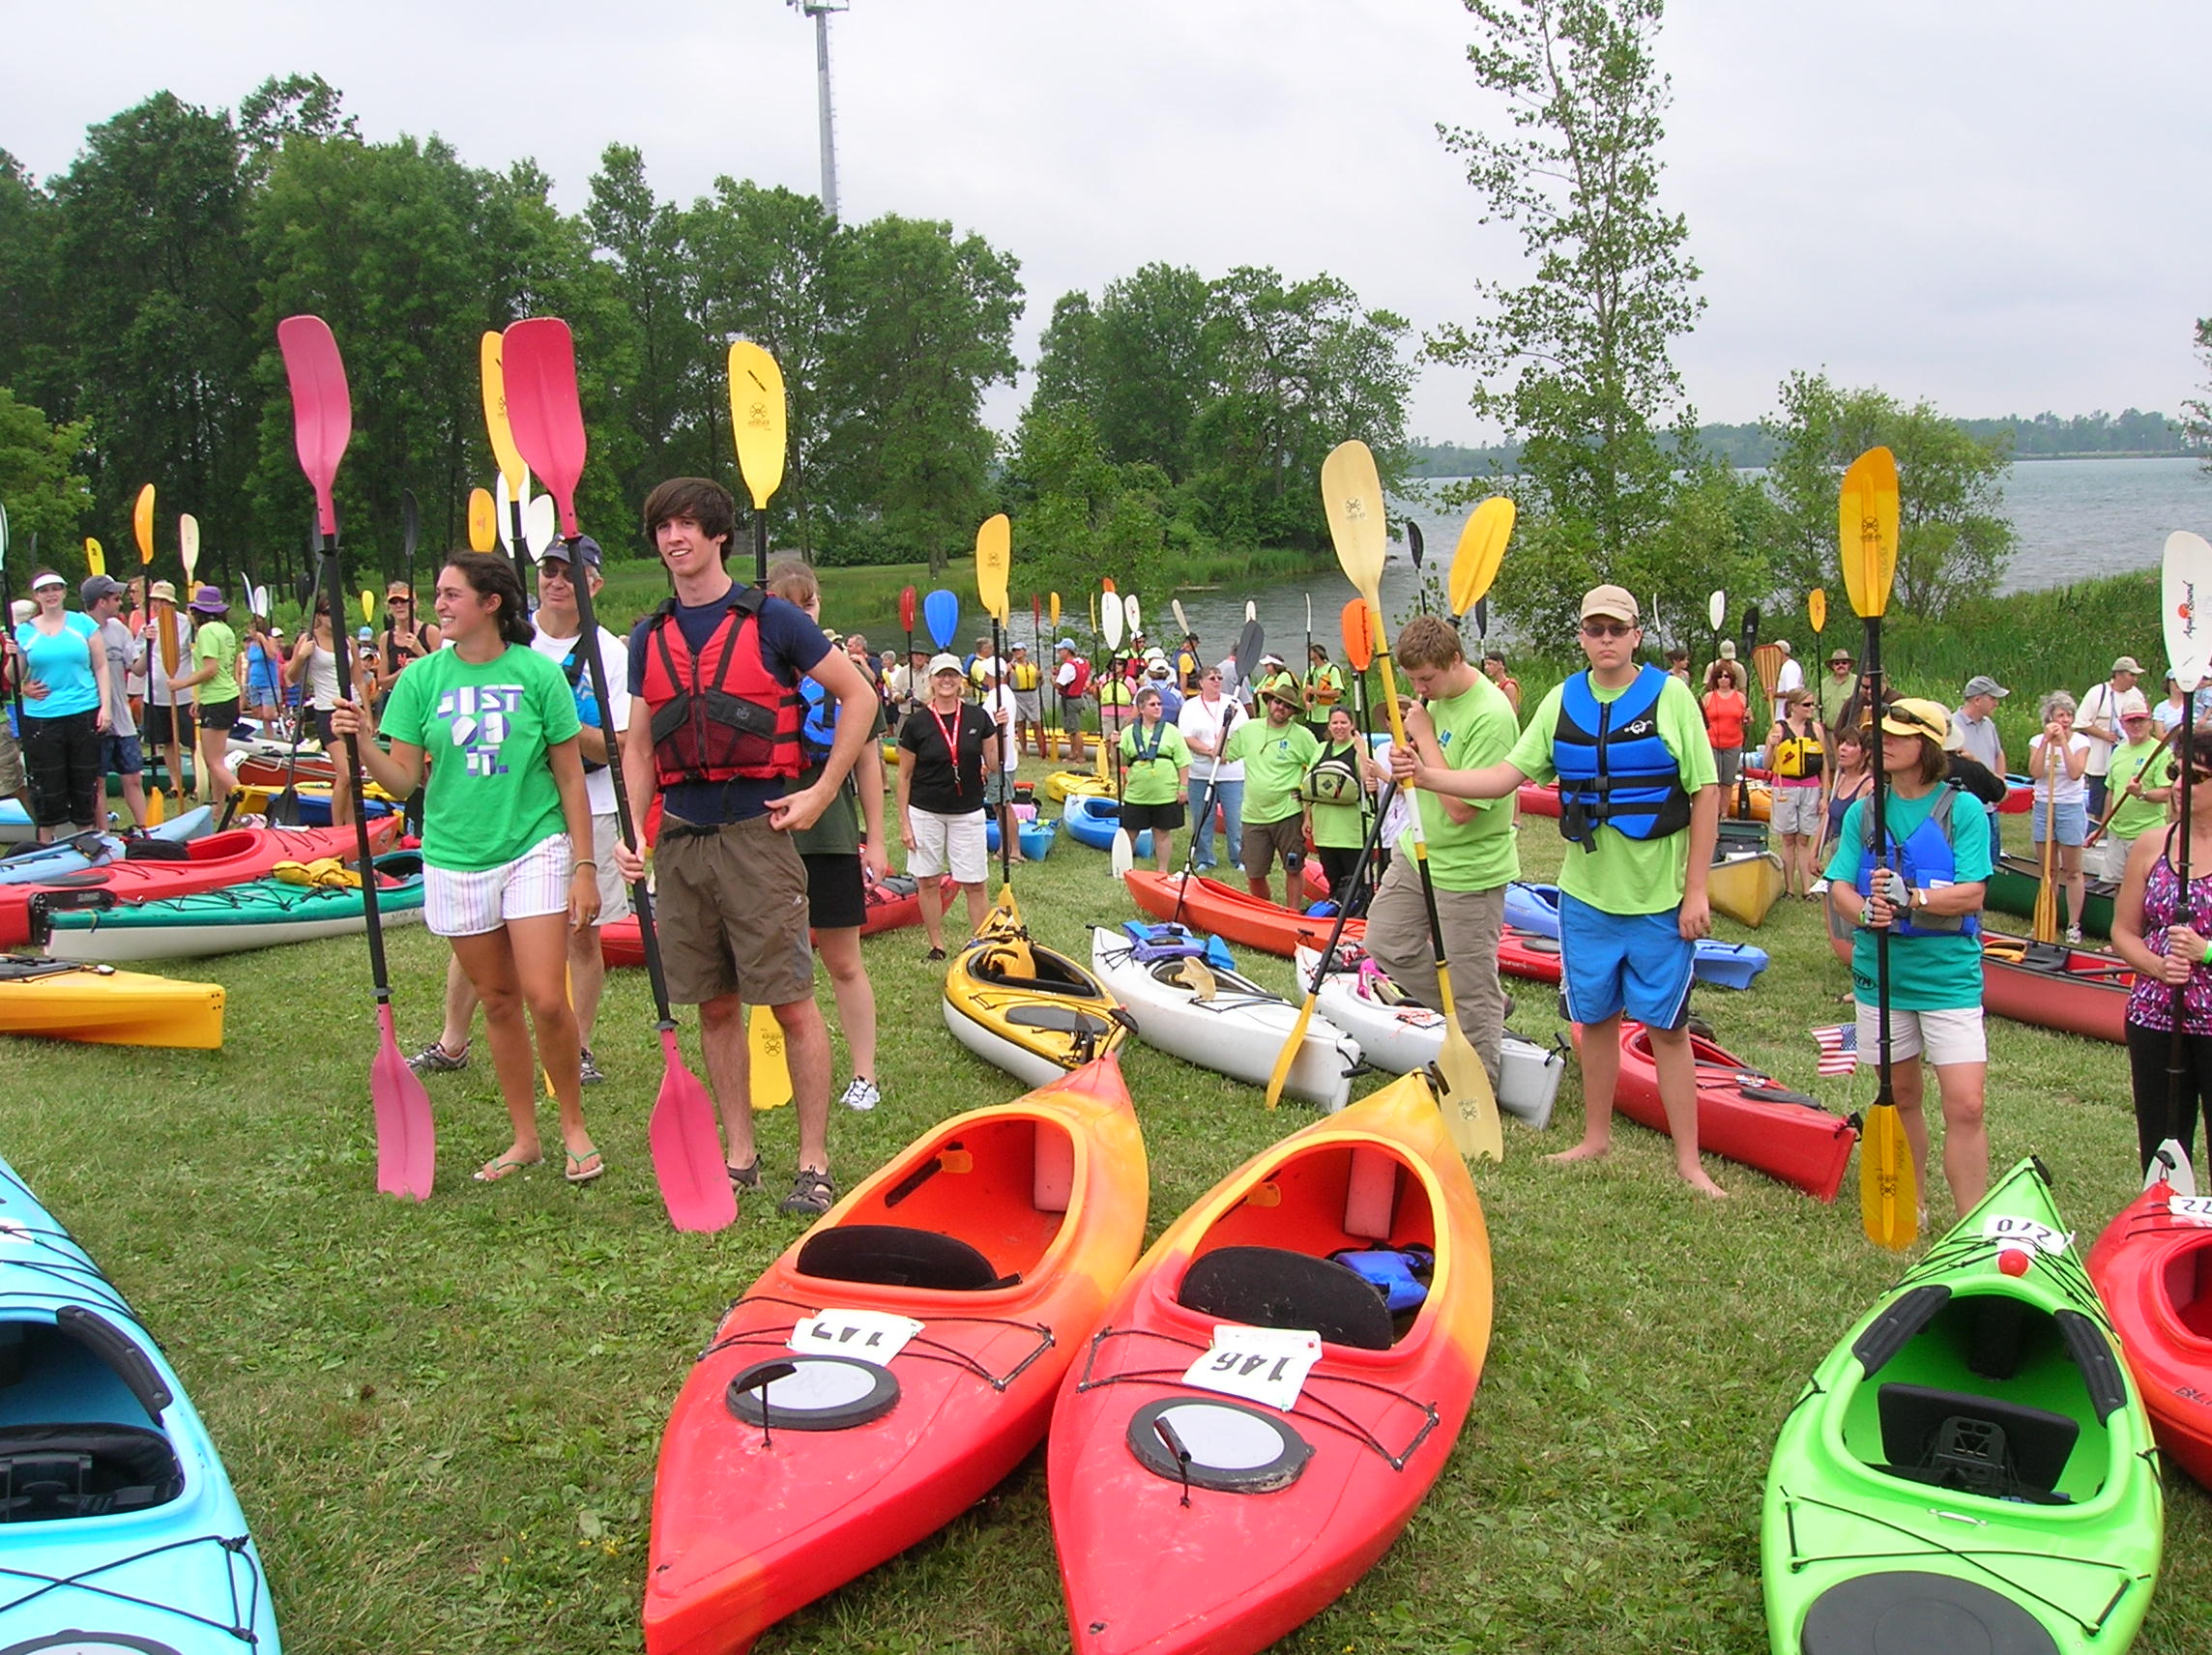 events are great places to recruit paddlers for the [http://www.cgauxed.org/paddle.htm Paddlesports America]